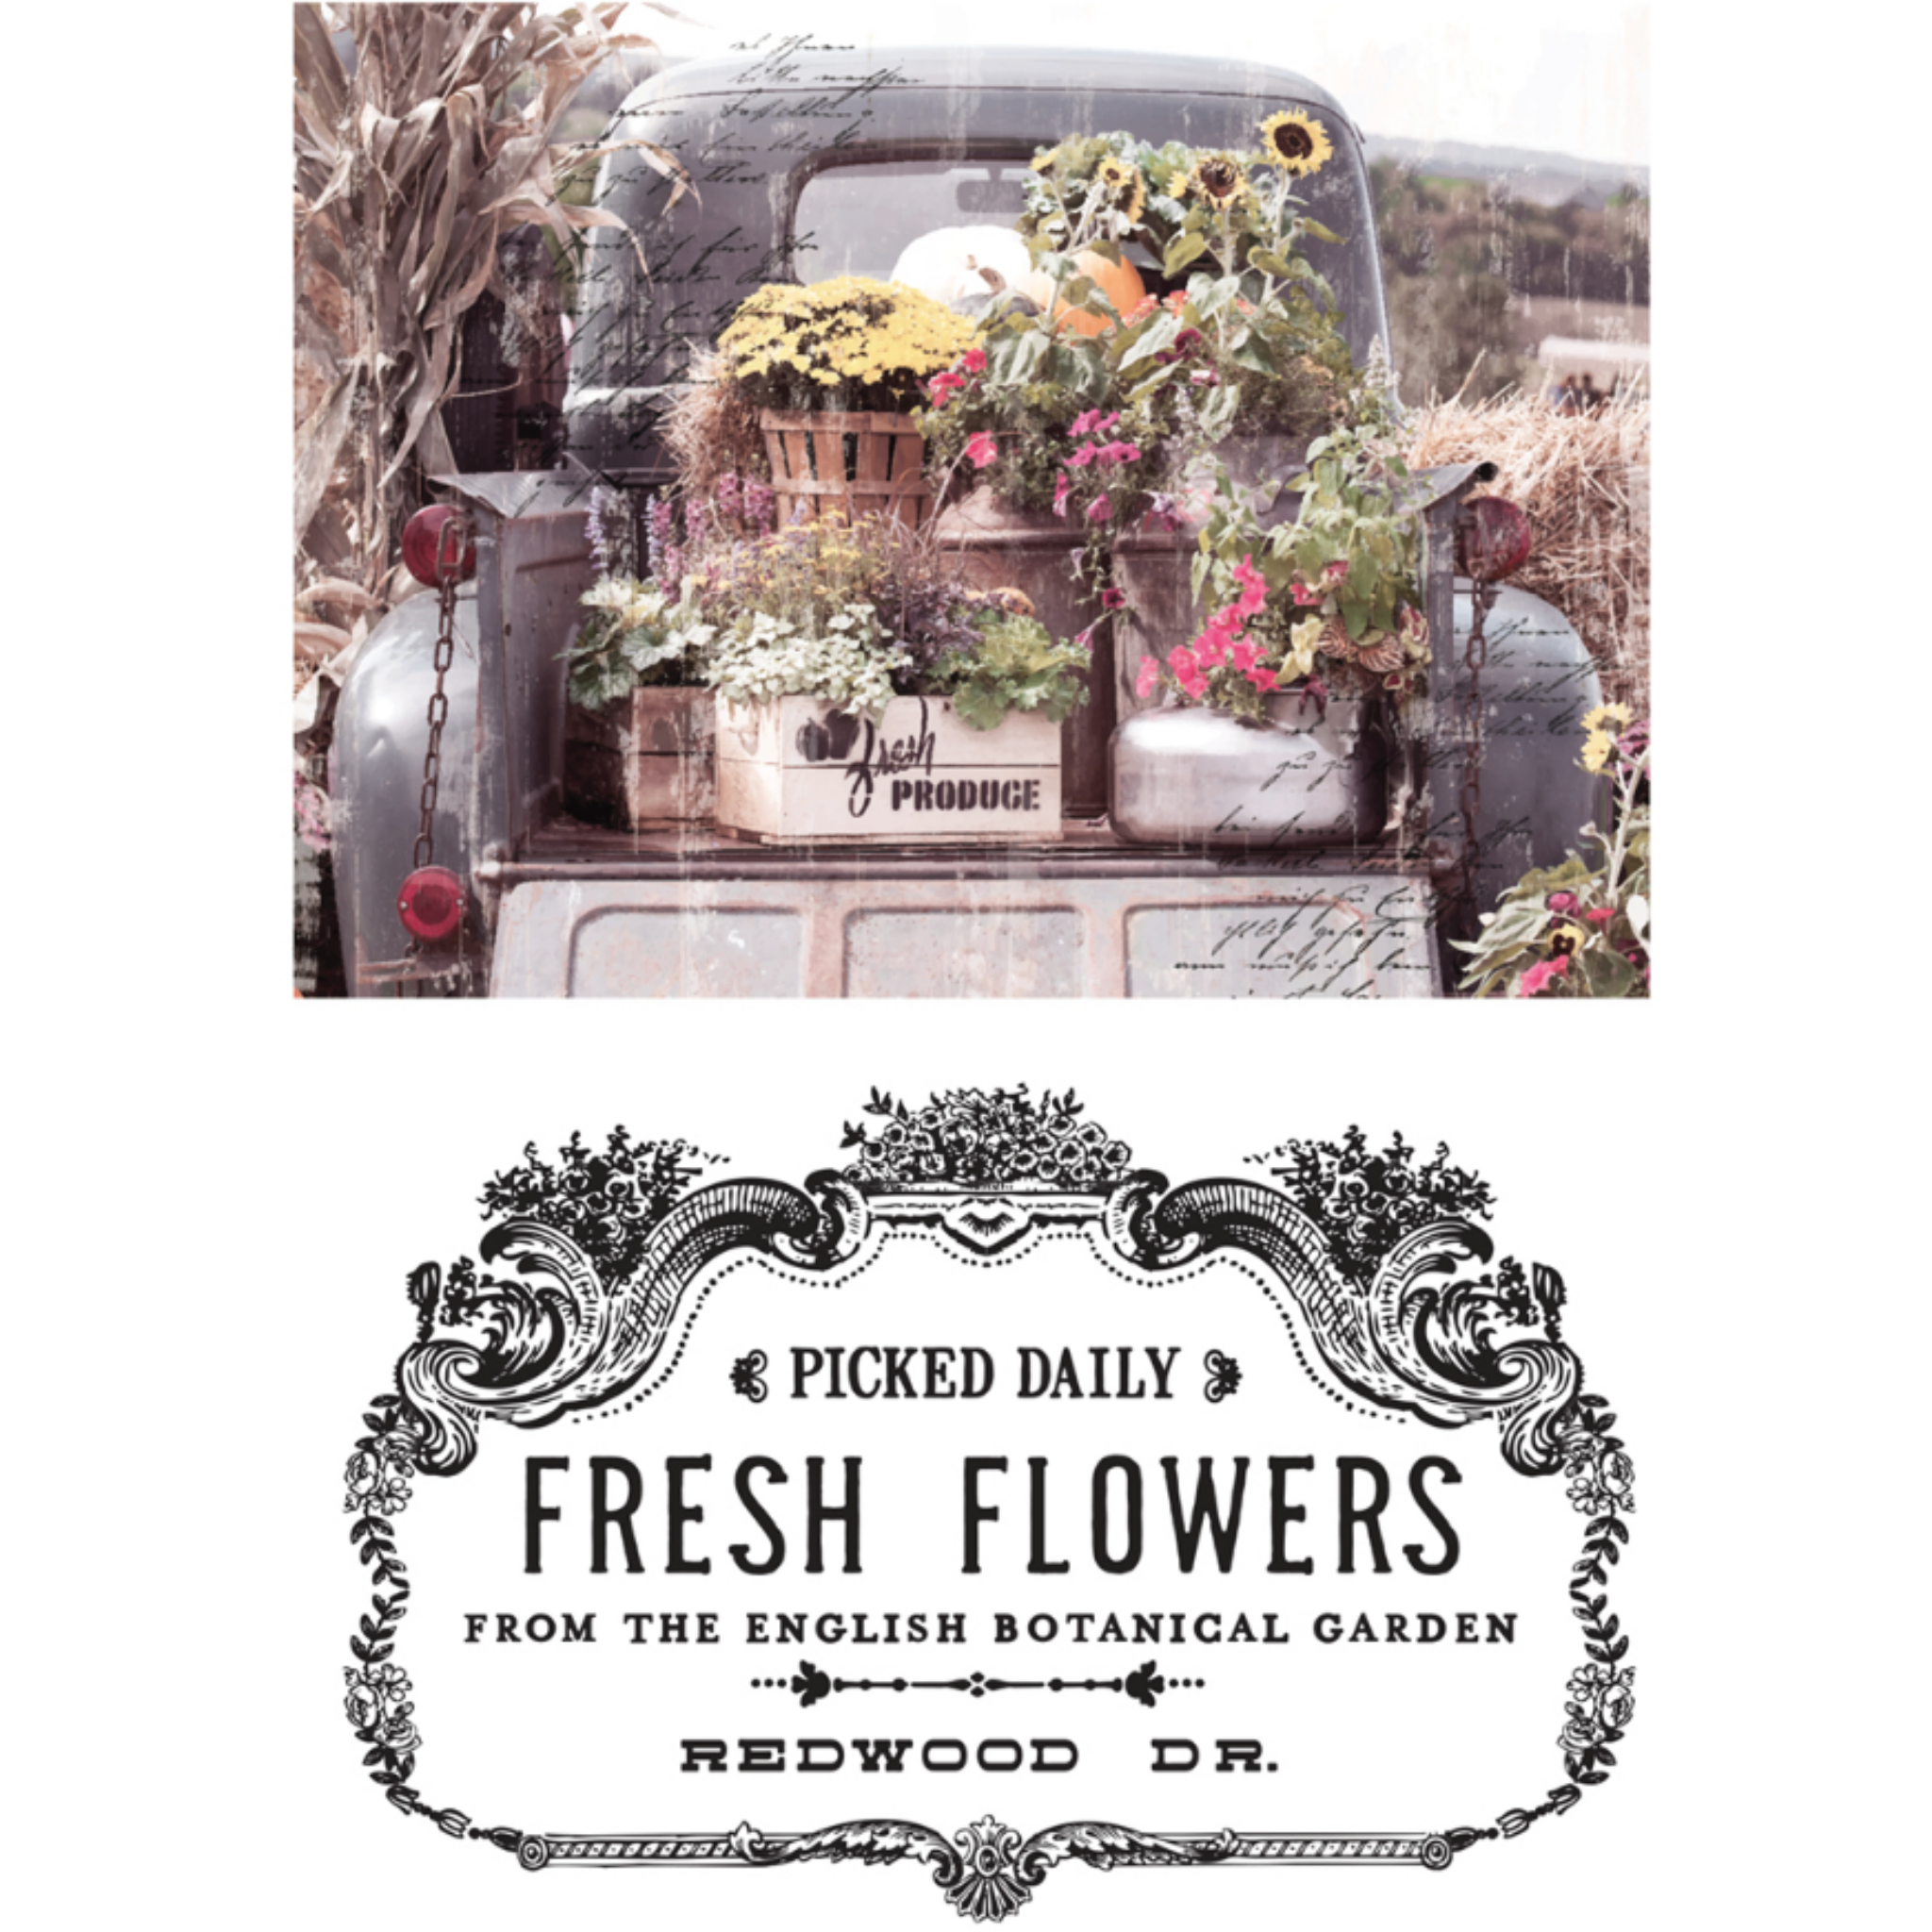 Two rub-on transfer designs. The design at the top features a bed of a vintage farm truck filled with bushels and crates of fresh picked flowers. The bottom design features a stamp of a farm sign that reads: Picked Daily. Fresh Flowers from the English Botanical Garden. Redwood Drive.